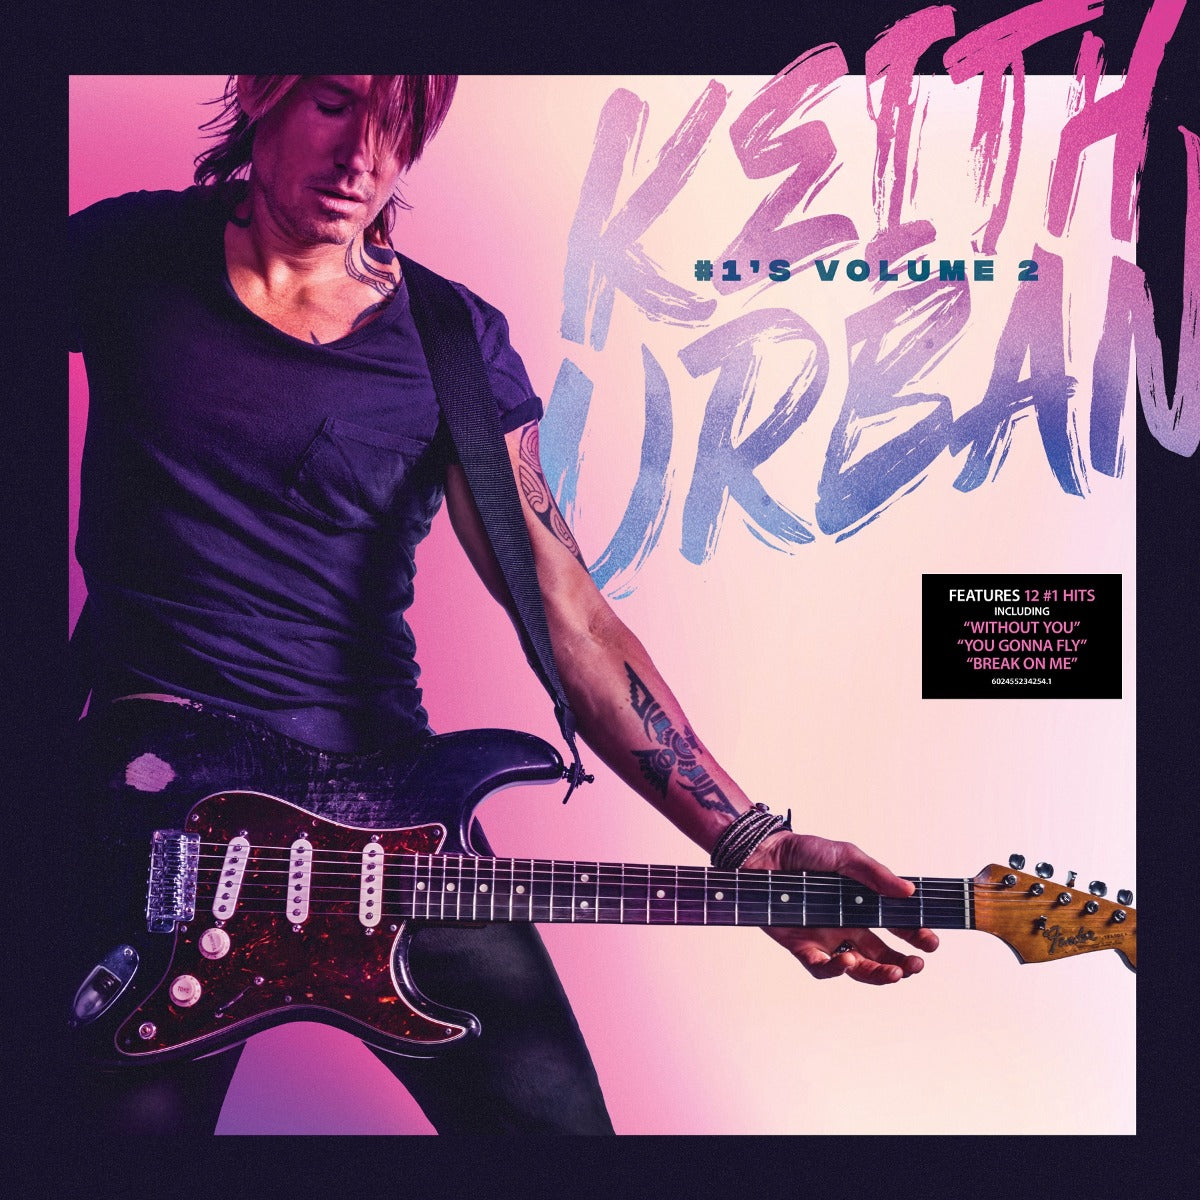 Keith Urban - Keith Urban - #1's Volume 2 (Limited Edition, Grape Colored Vinyl, Poster)